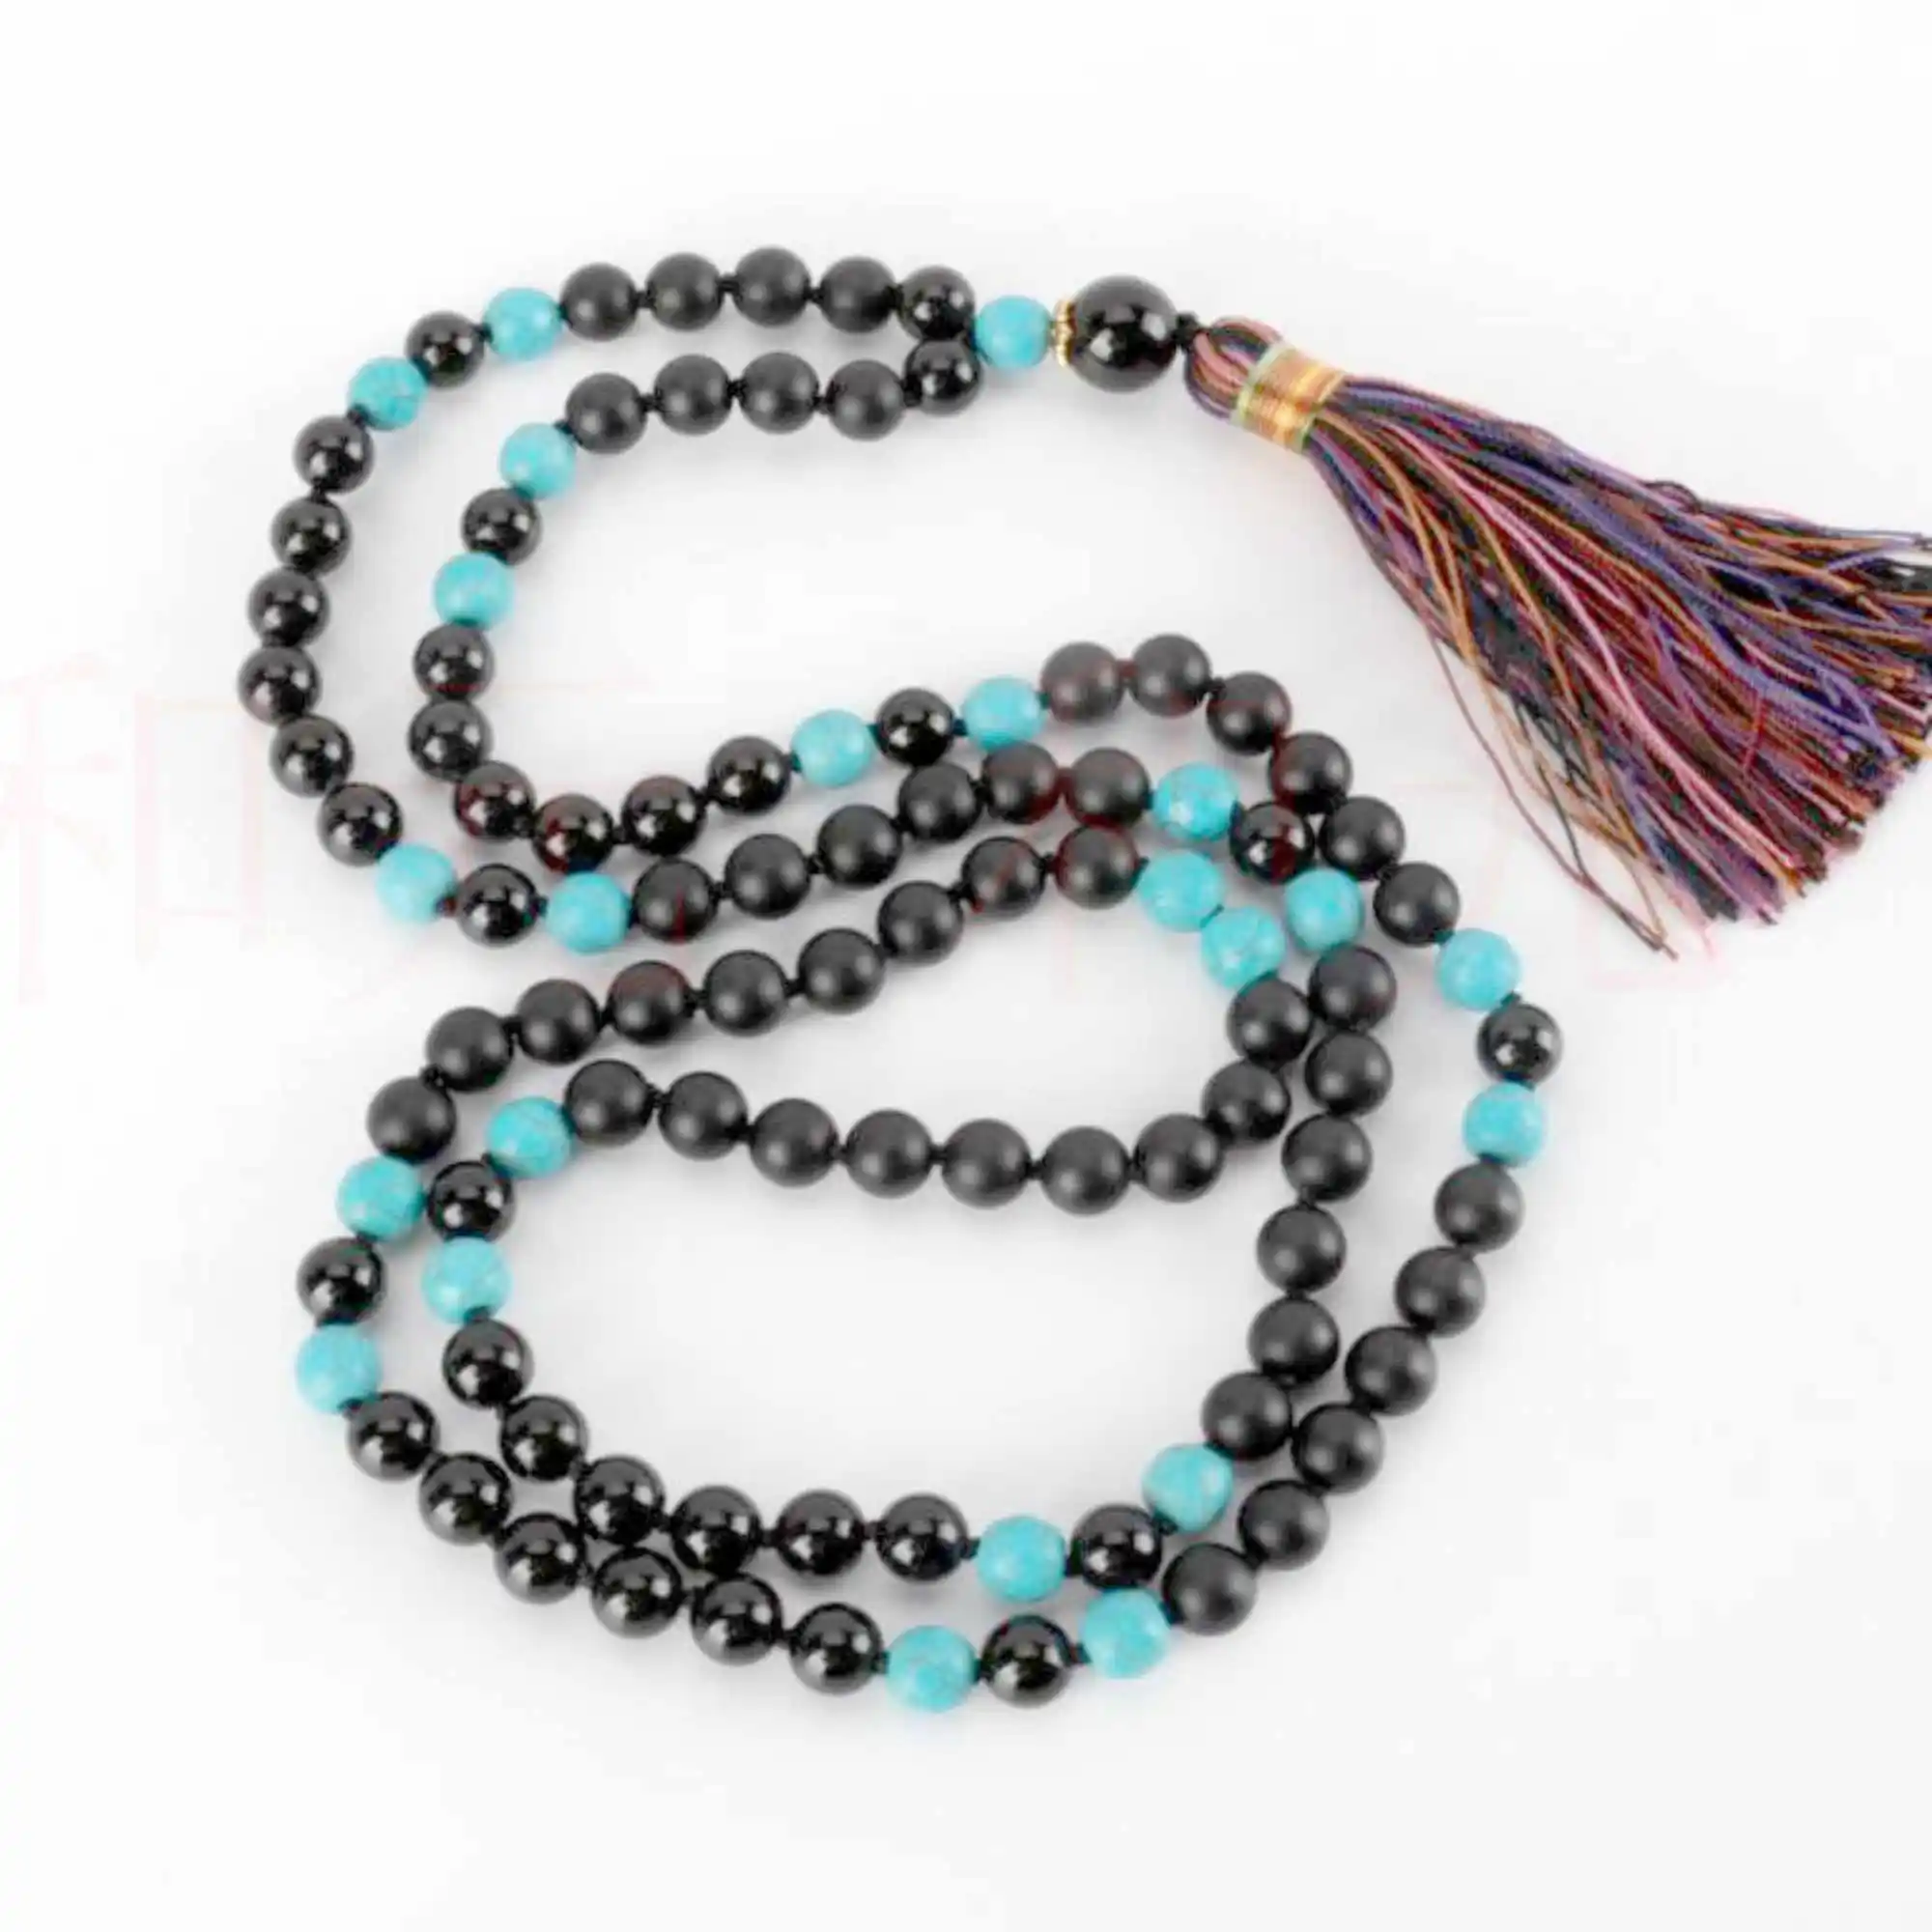 

8mm Natural 108 knot black agate Blue Turquoise necklace spread Buddhism Elegant Inspiration Energy Handmade Dark Matter Chain